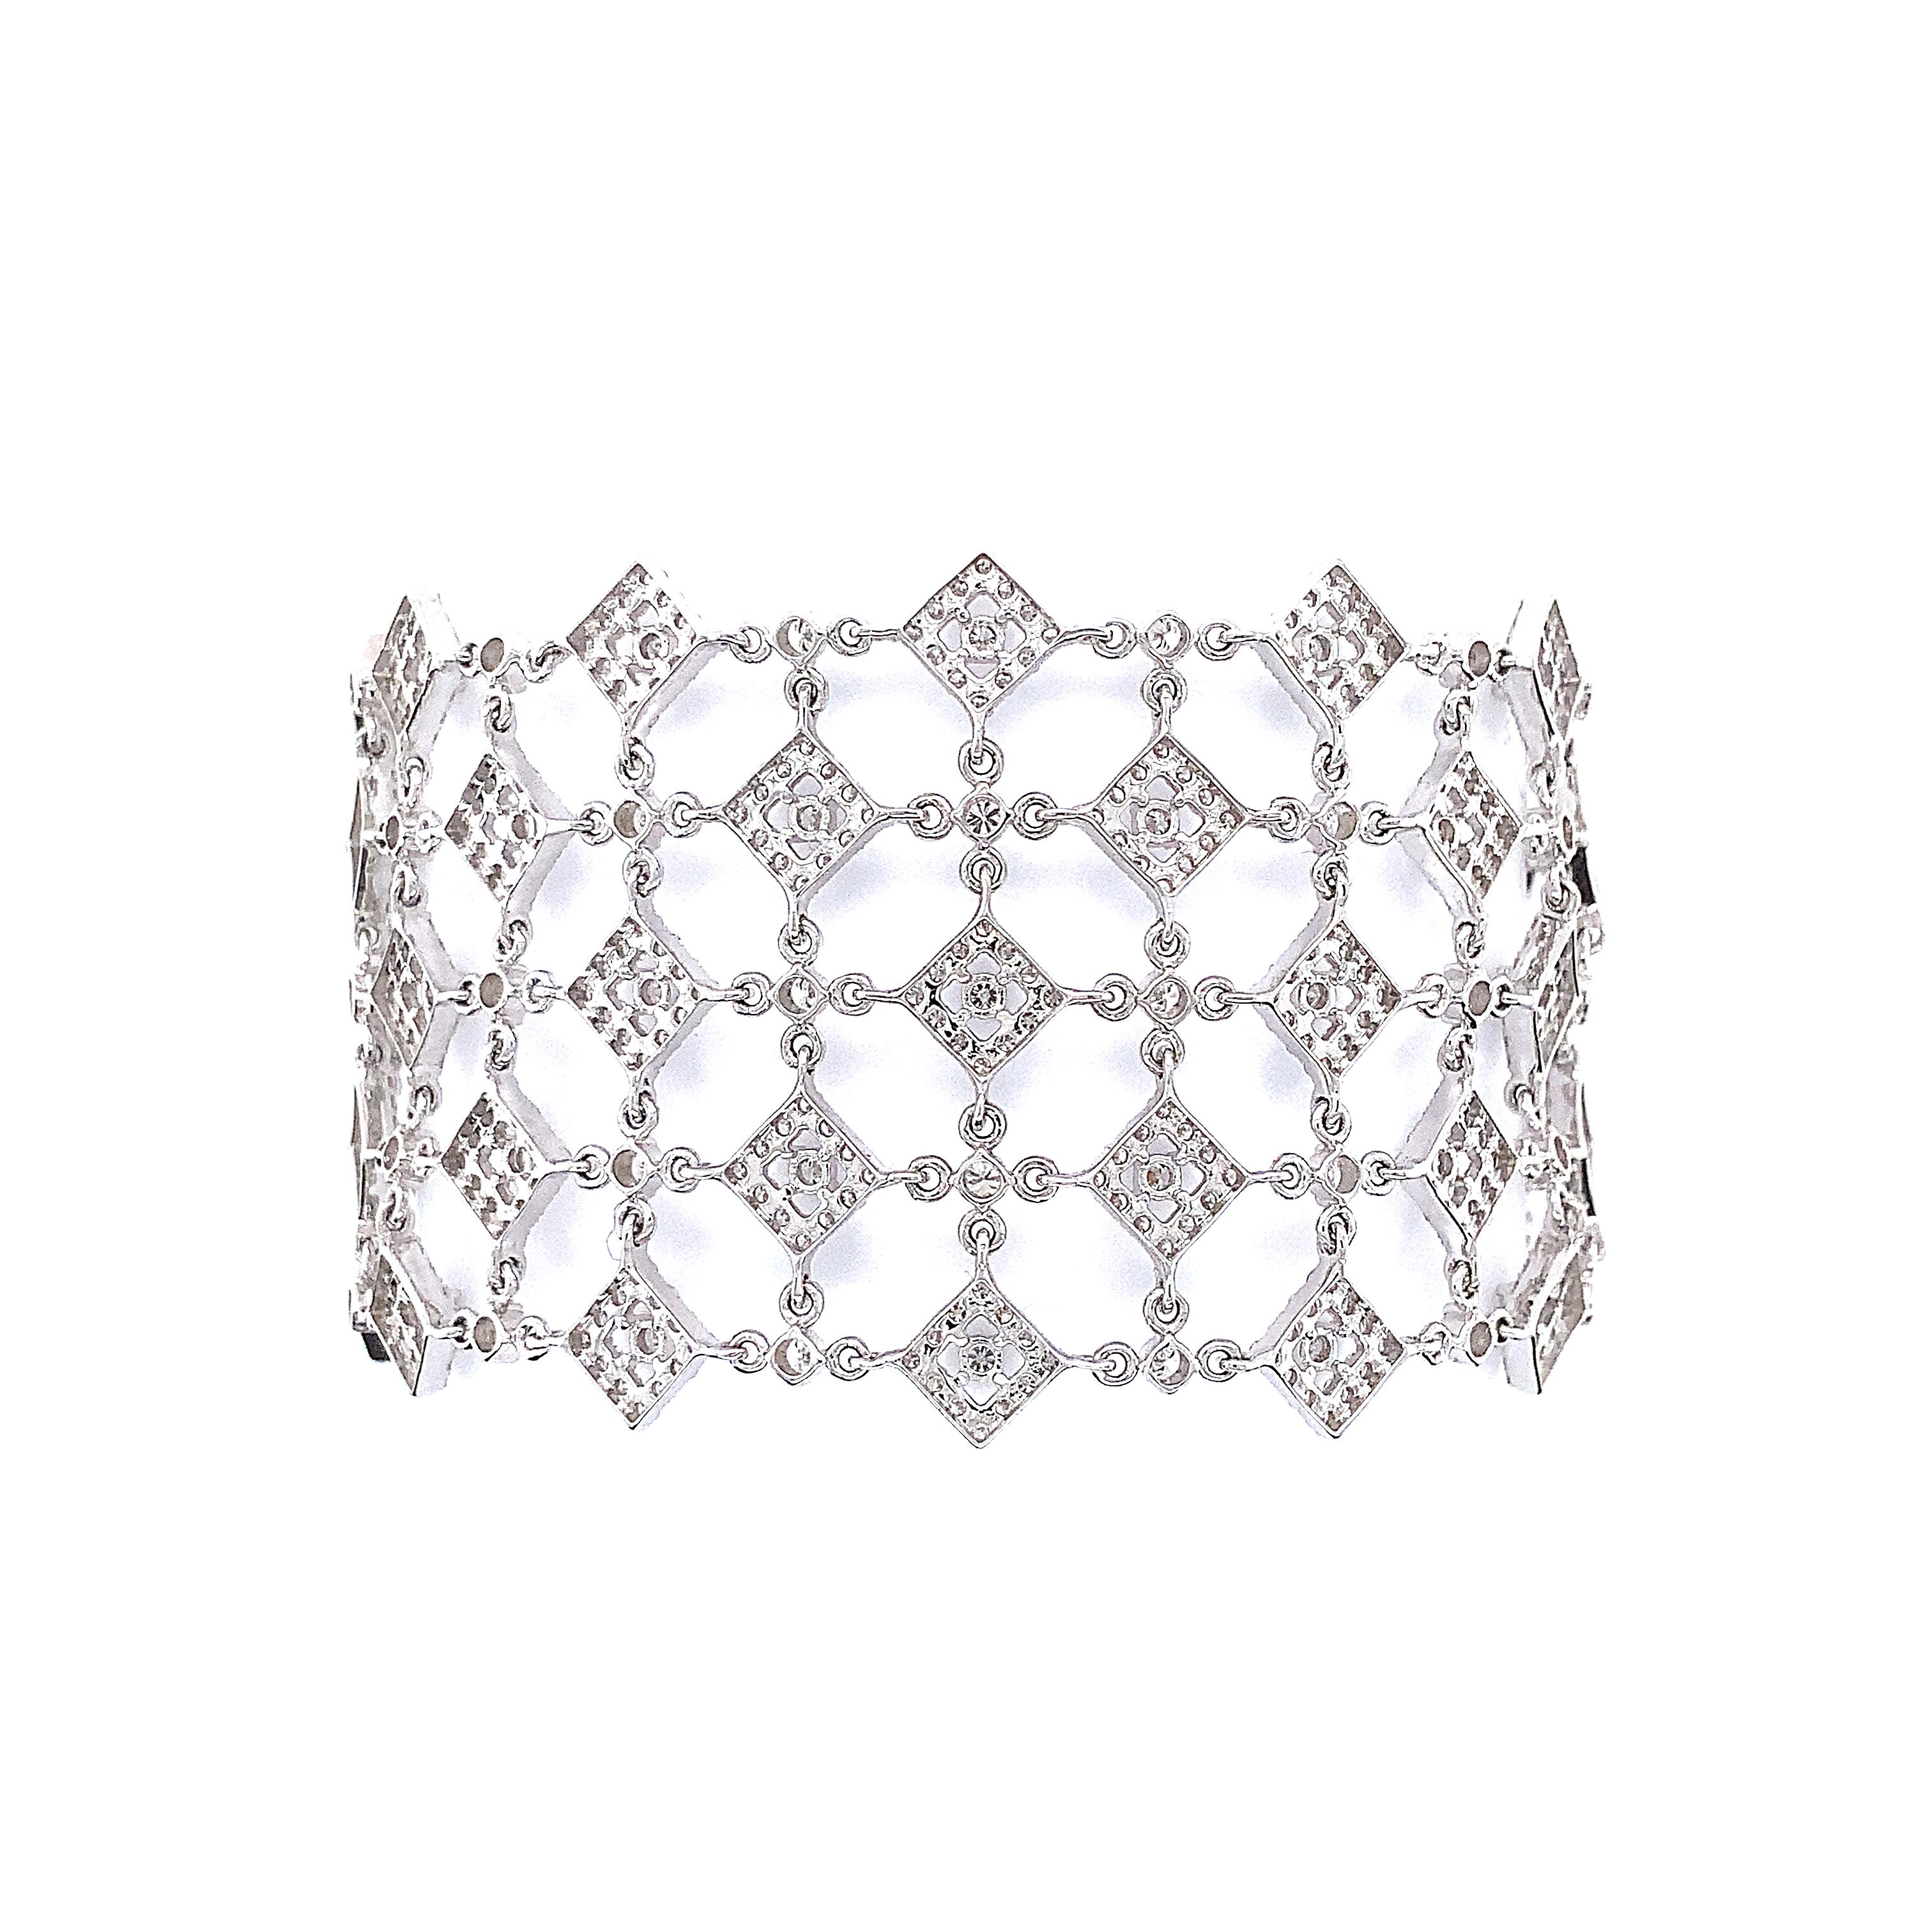 Round Cut Afarin Collection 5 Row Fancy 7 carat Diamond Bracelet set in 18K White Gold For Sale